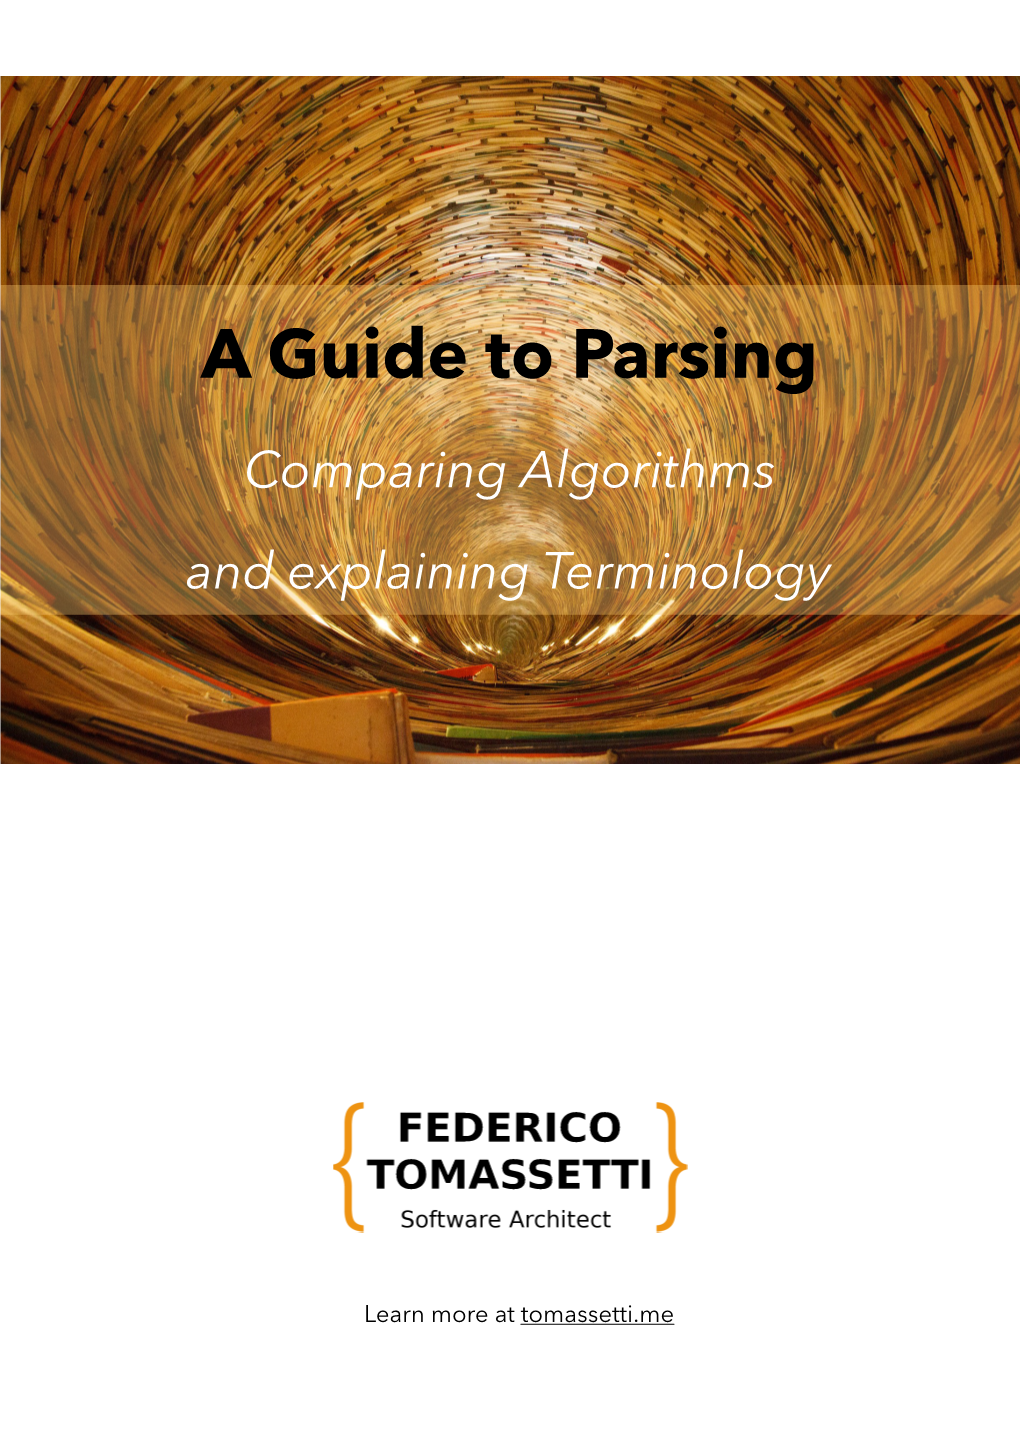 A Guide to Parsing